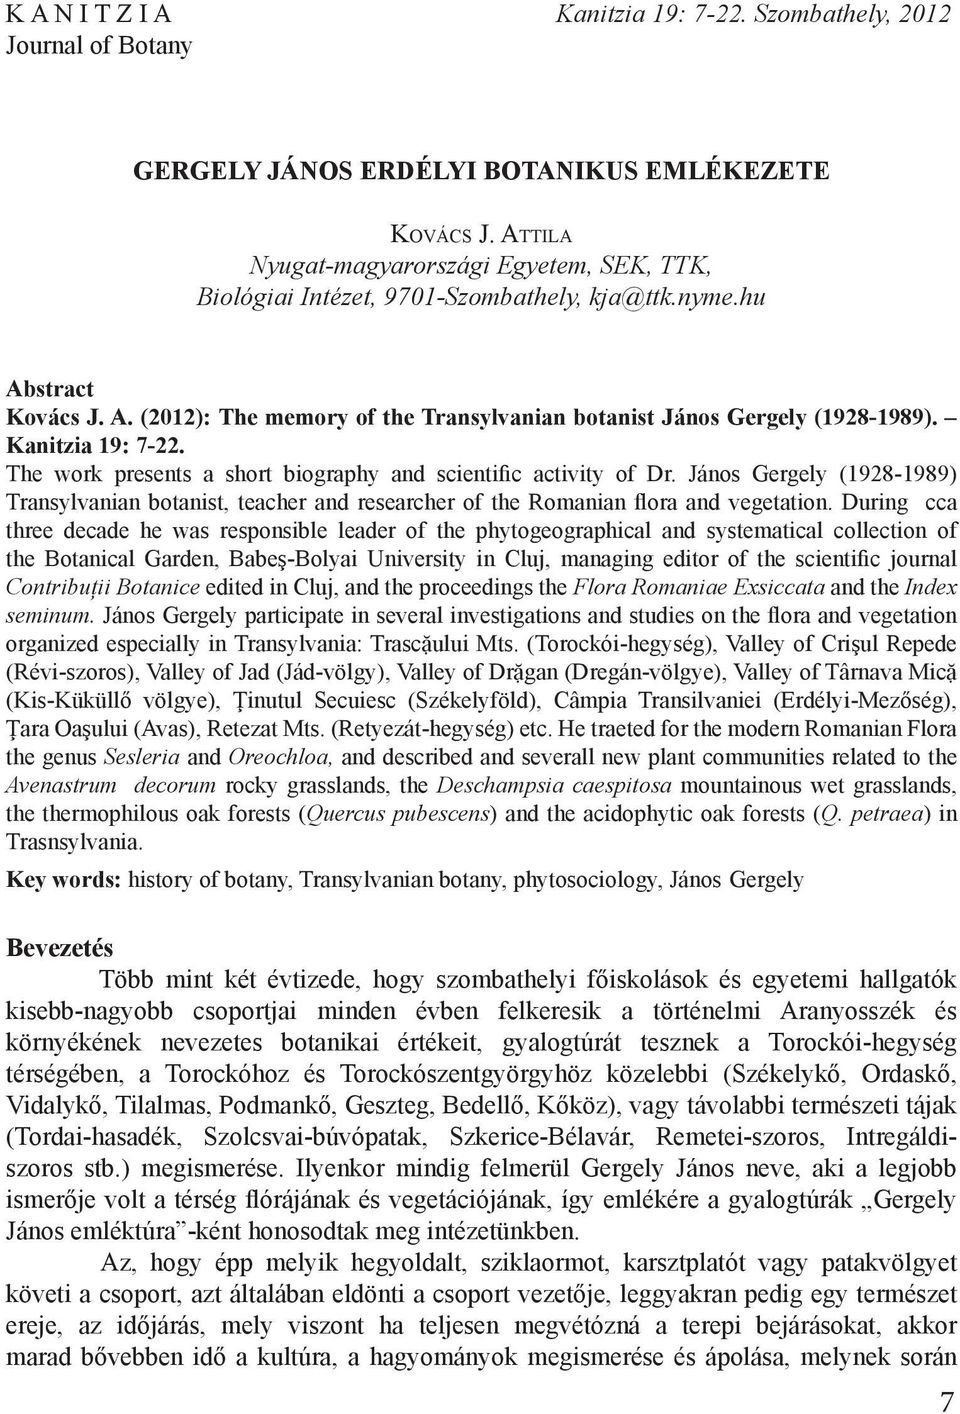 Kanitzia 19: 7-22. The work presents a short biography and scientific activity of Dr. János Gergely (1928-1989) Transylvanian botanist, teacher and researcher of the Romanian flora and vegetation.